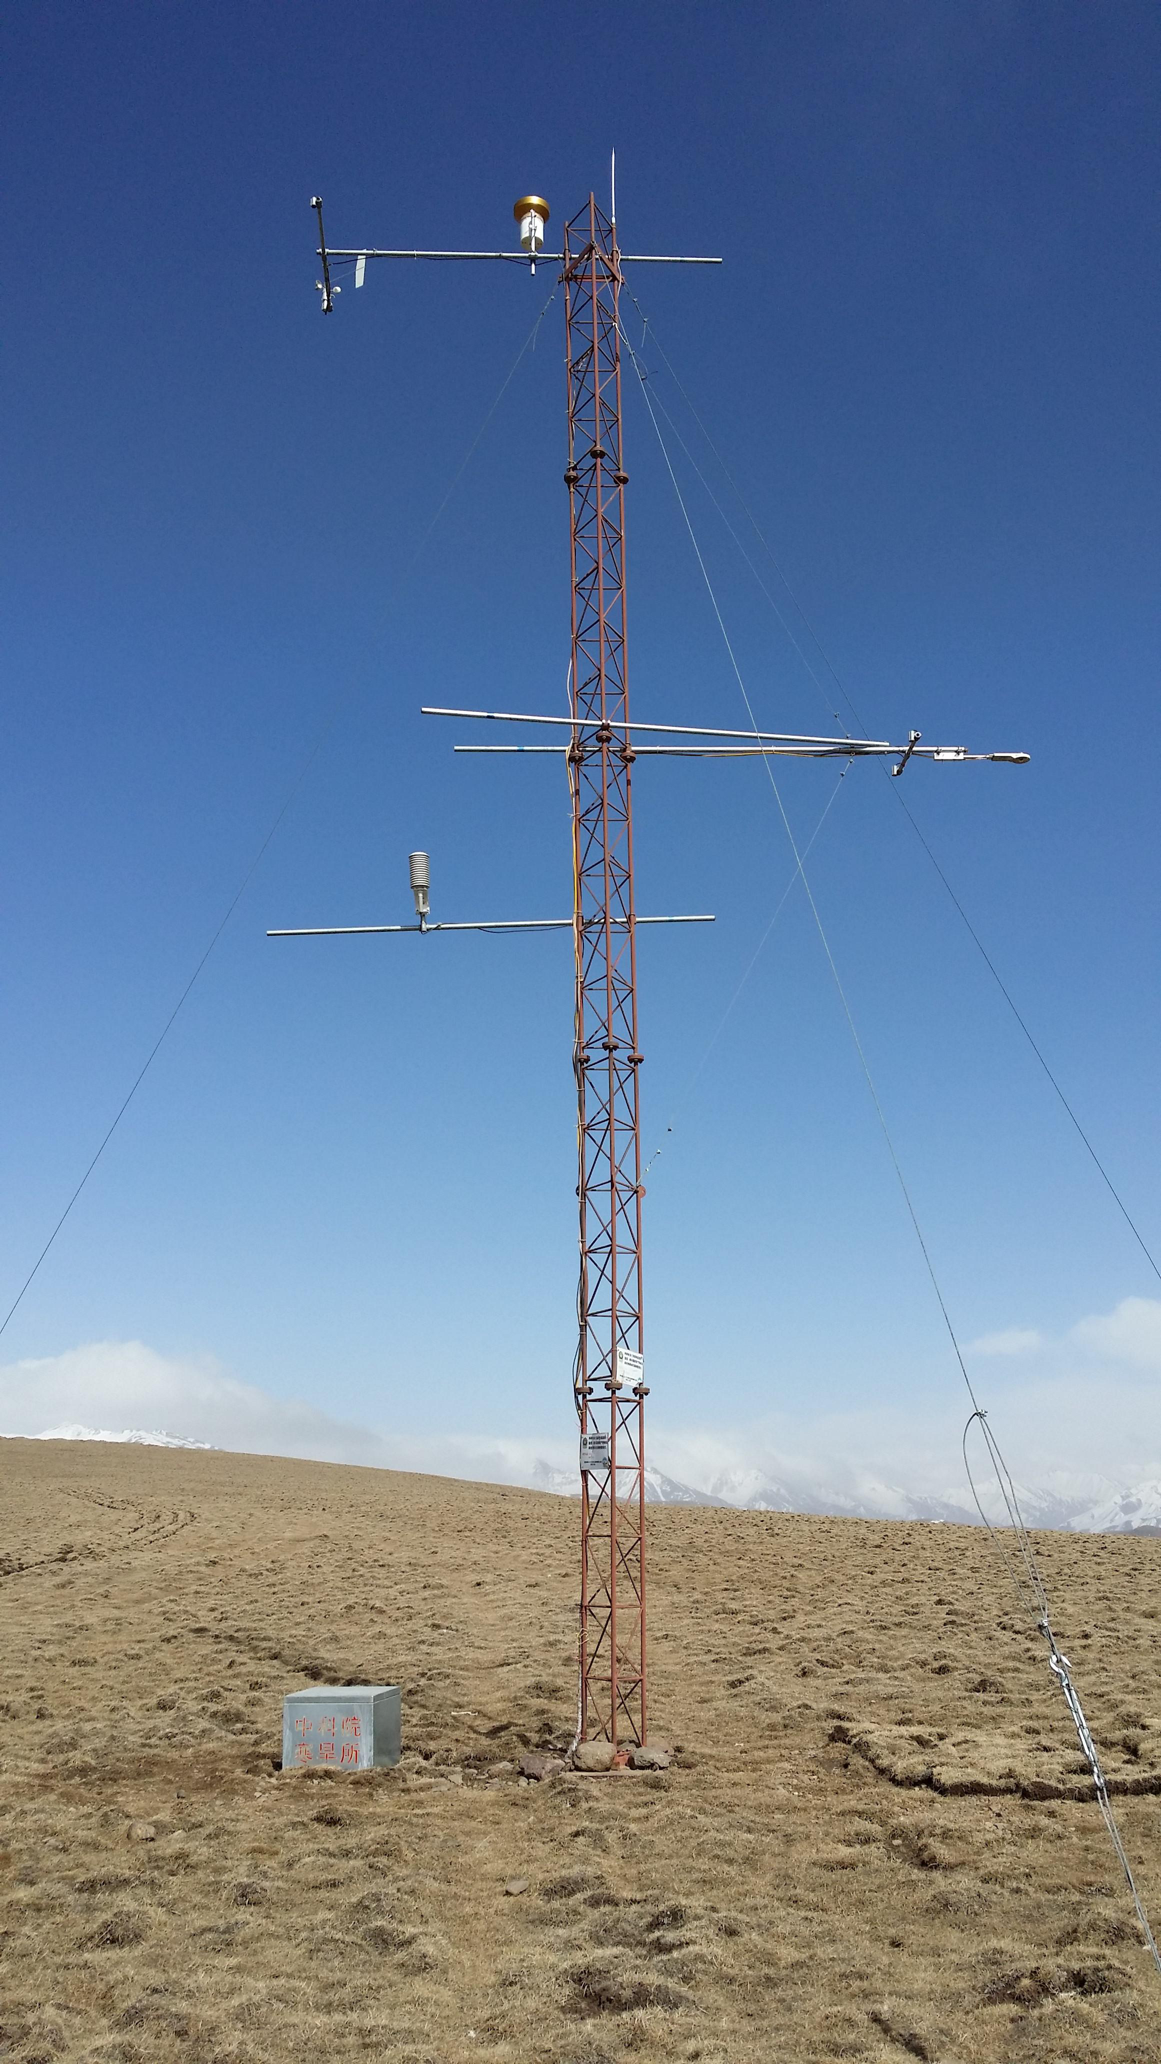 Qilian Mountains integrated observatory network: Dataset of Heihe integrated observatory network (eddy covariance system of Jingyangling station, 2021)